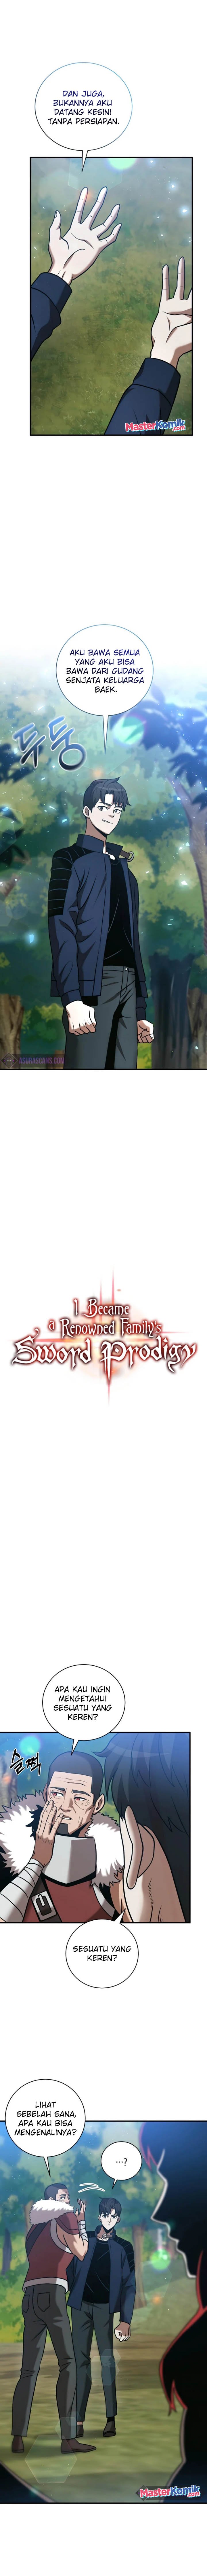 I Became A Renowned Family'S Sword Prodigy Chapter 20 - 111